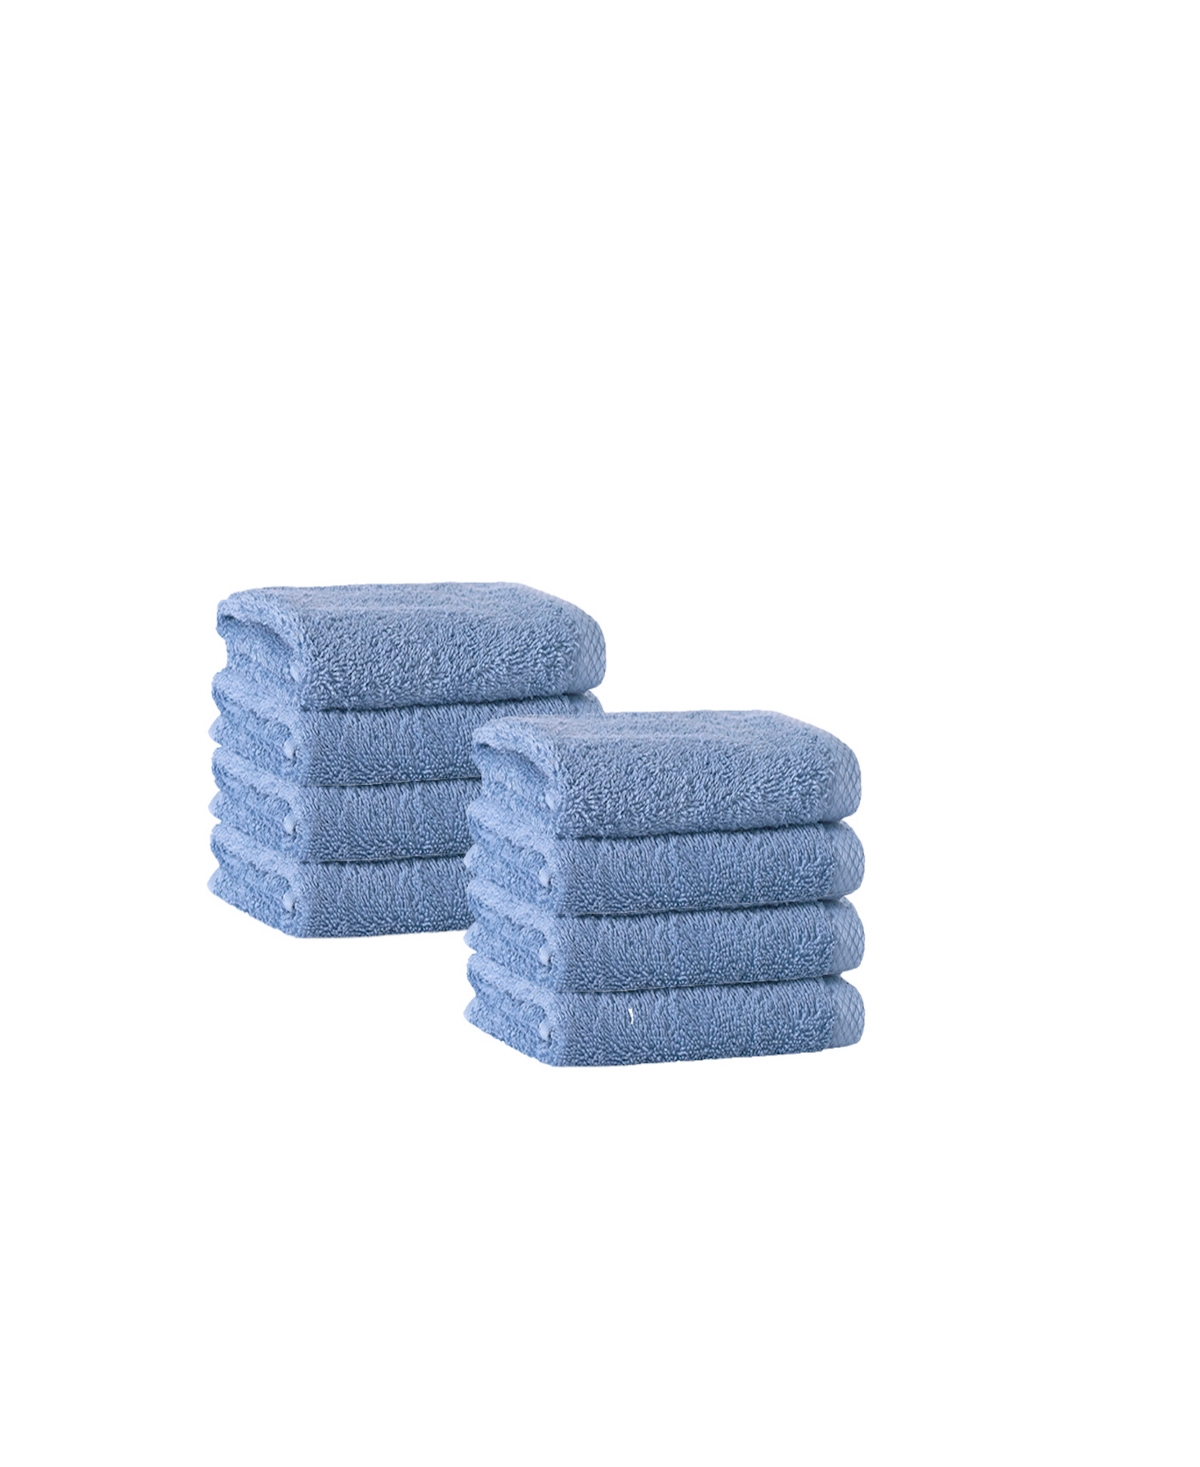 Enchante Home Signature 8-pc. Wash Towels Turkish Cotton Towel Set In Turquoise